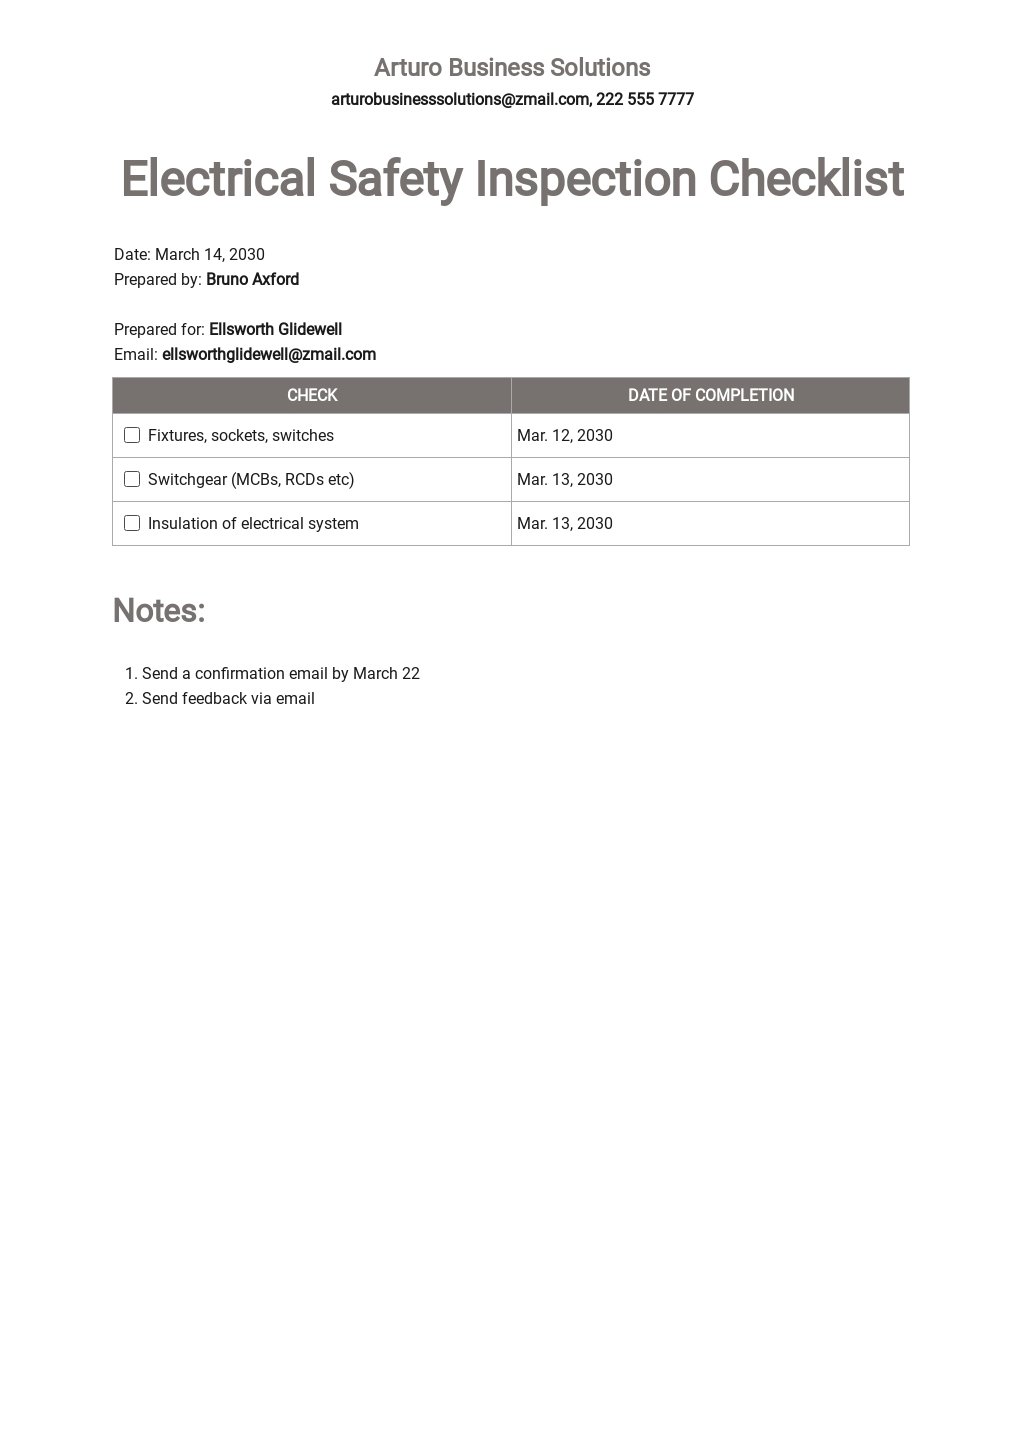 Electrical Safety Inspection Checklist Template.jpe